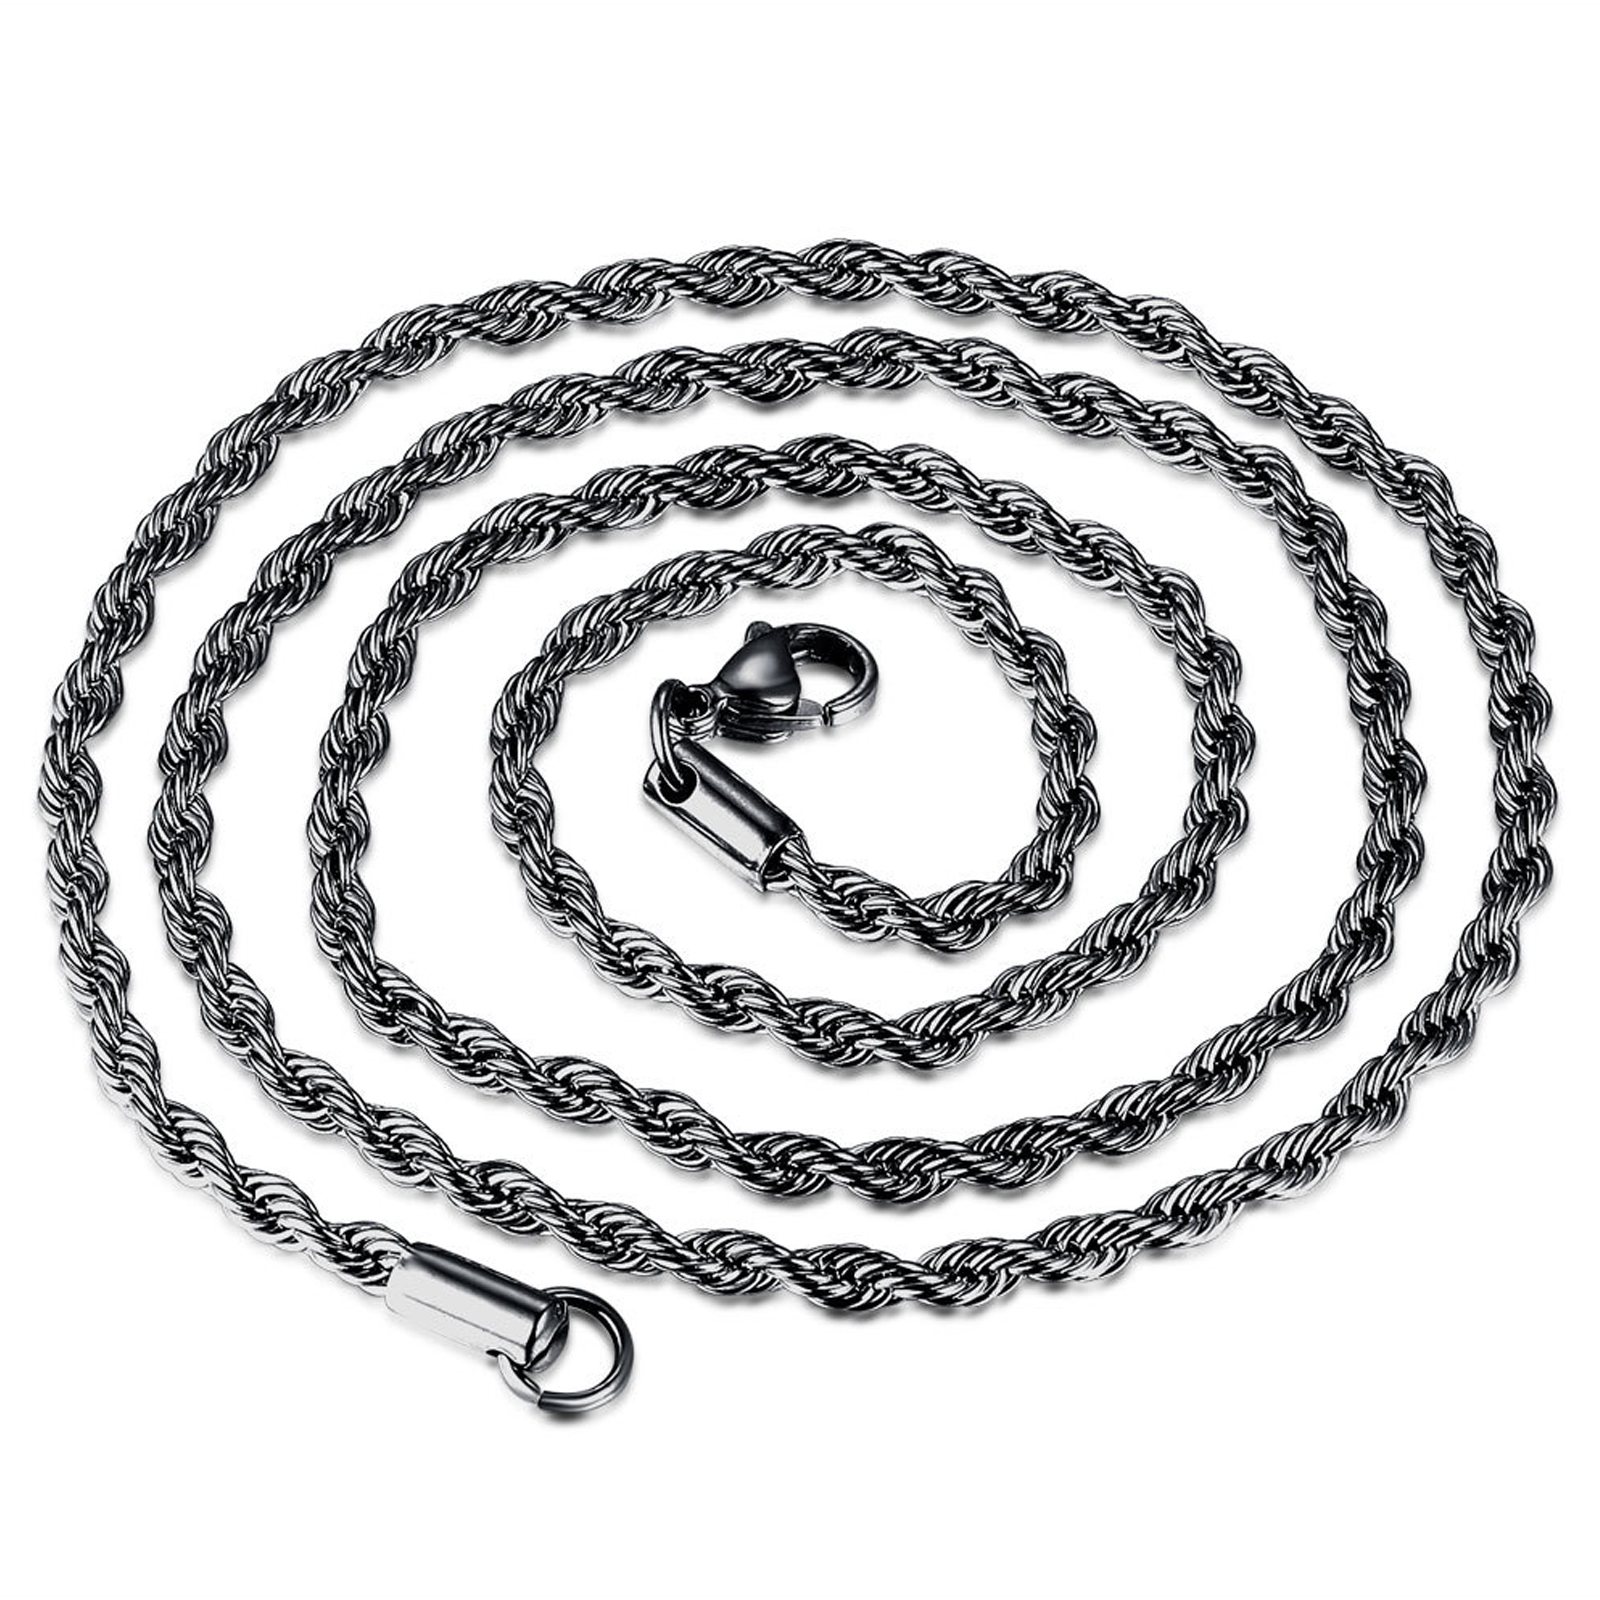 Picture of Stainless Steel Braided Rope Chain Necklace Gunmetal 46cm(18 1/8") long, 1 Piece